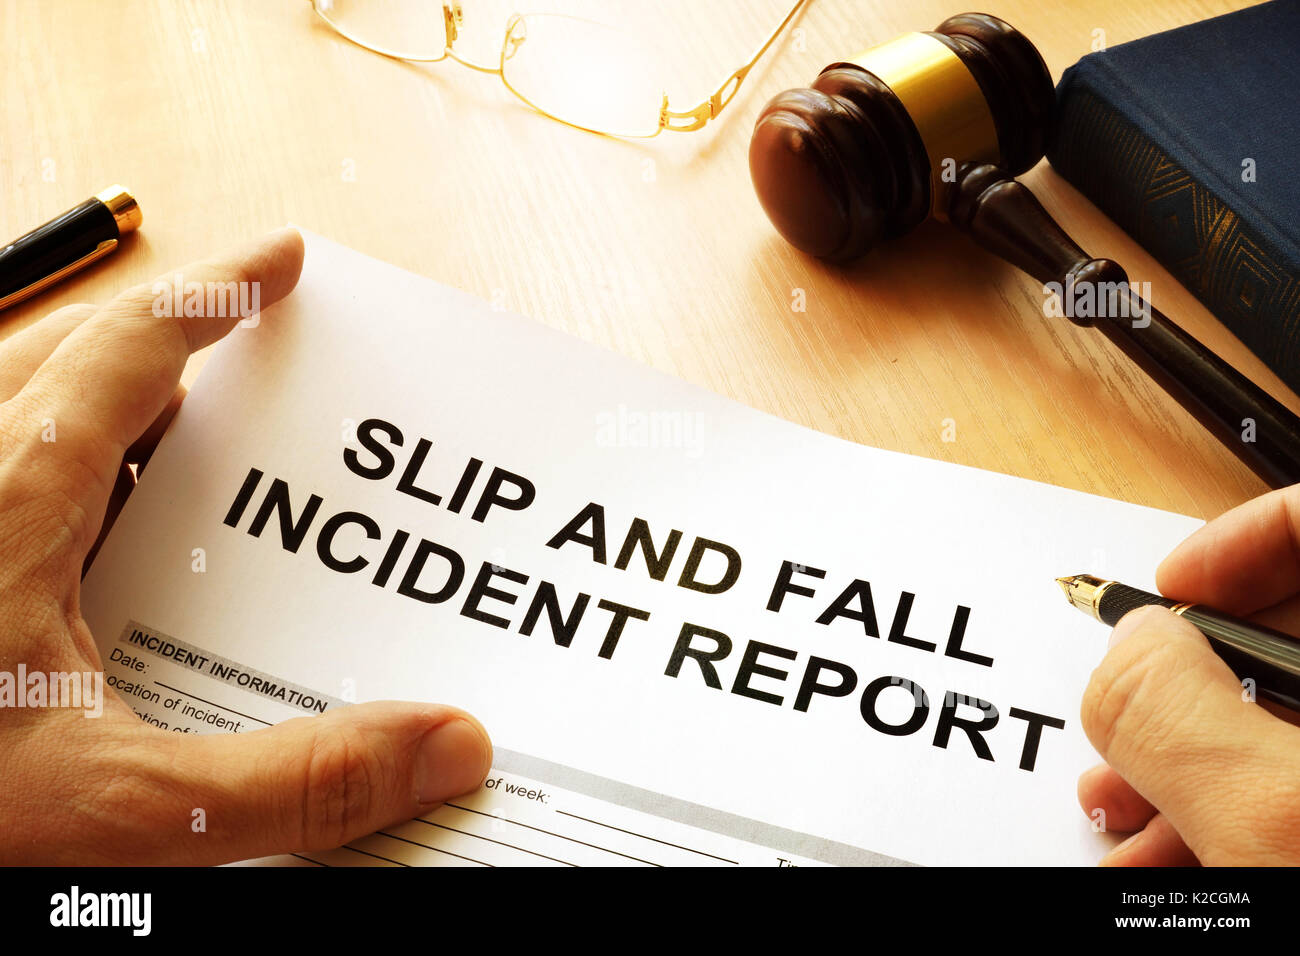 Slip and fall injury report on a table. Stock Photo